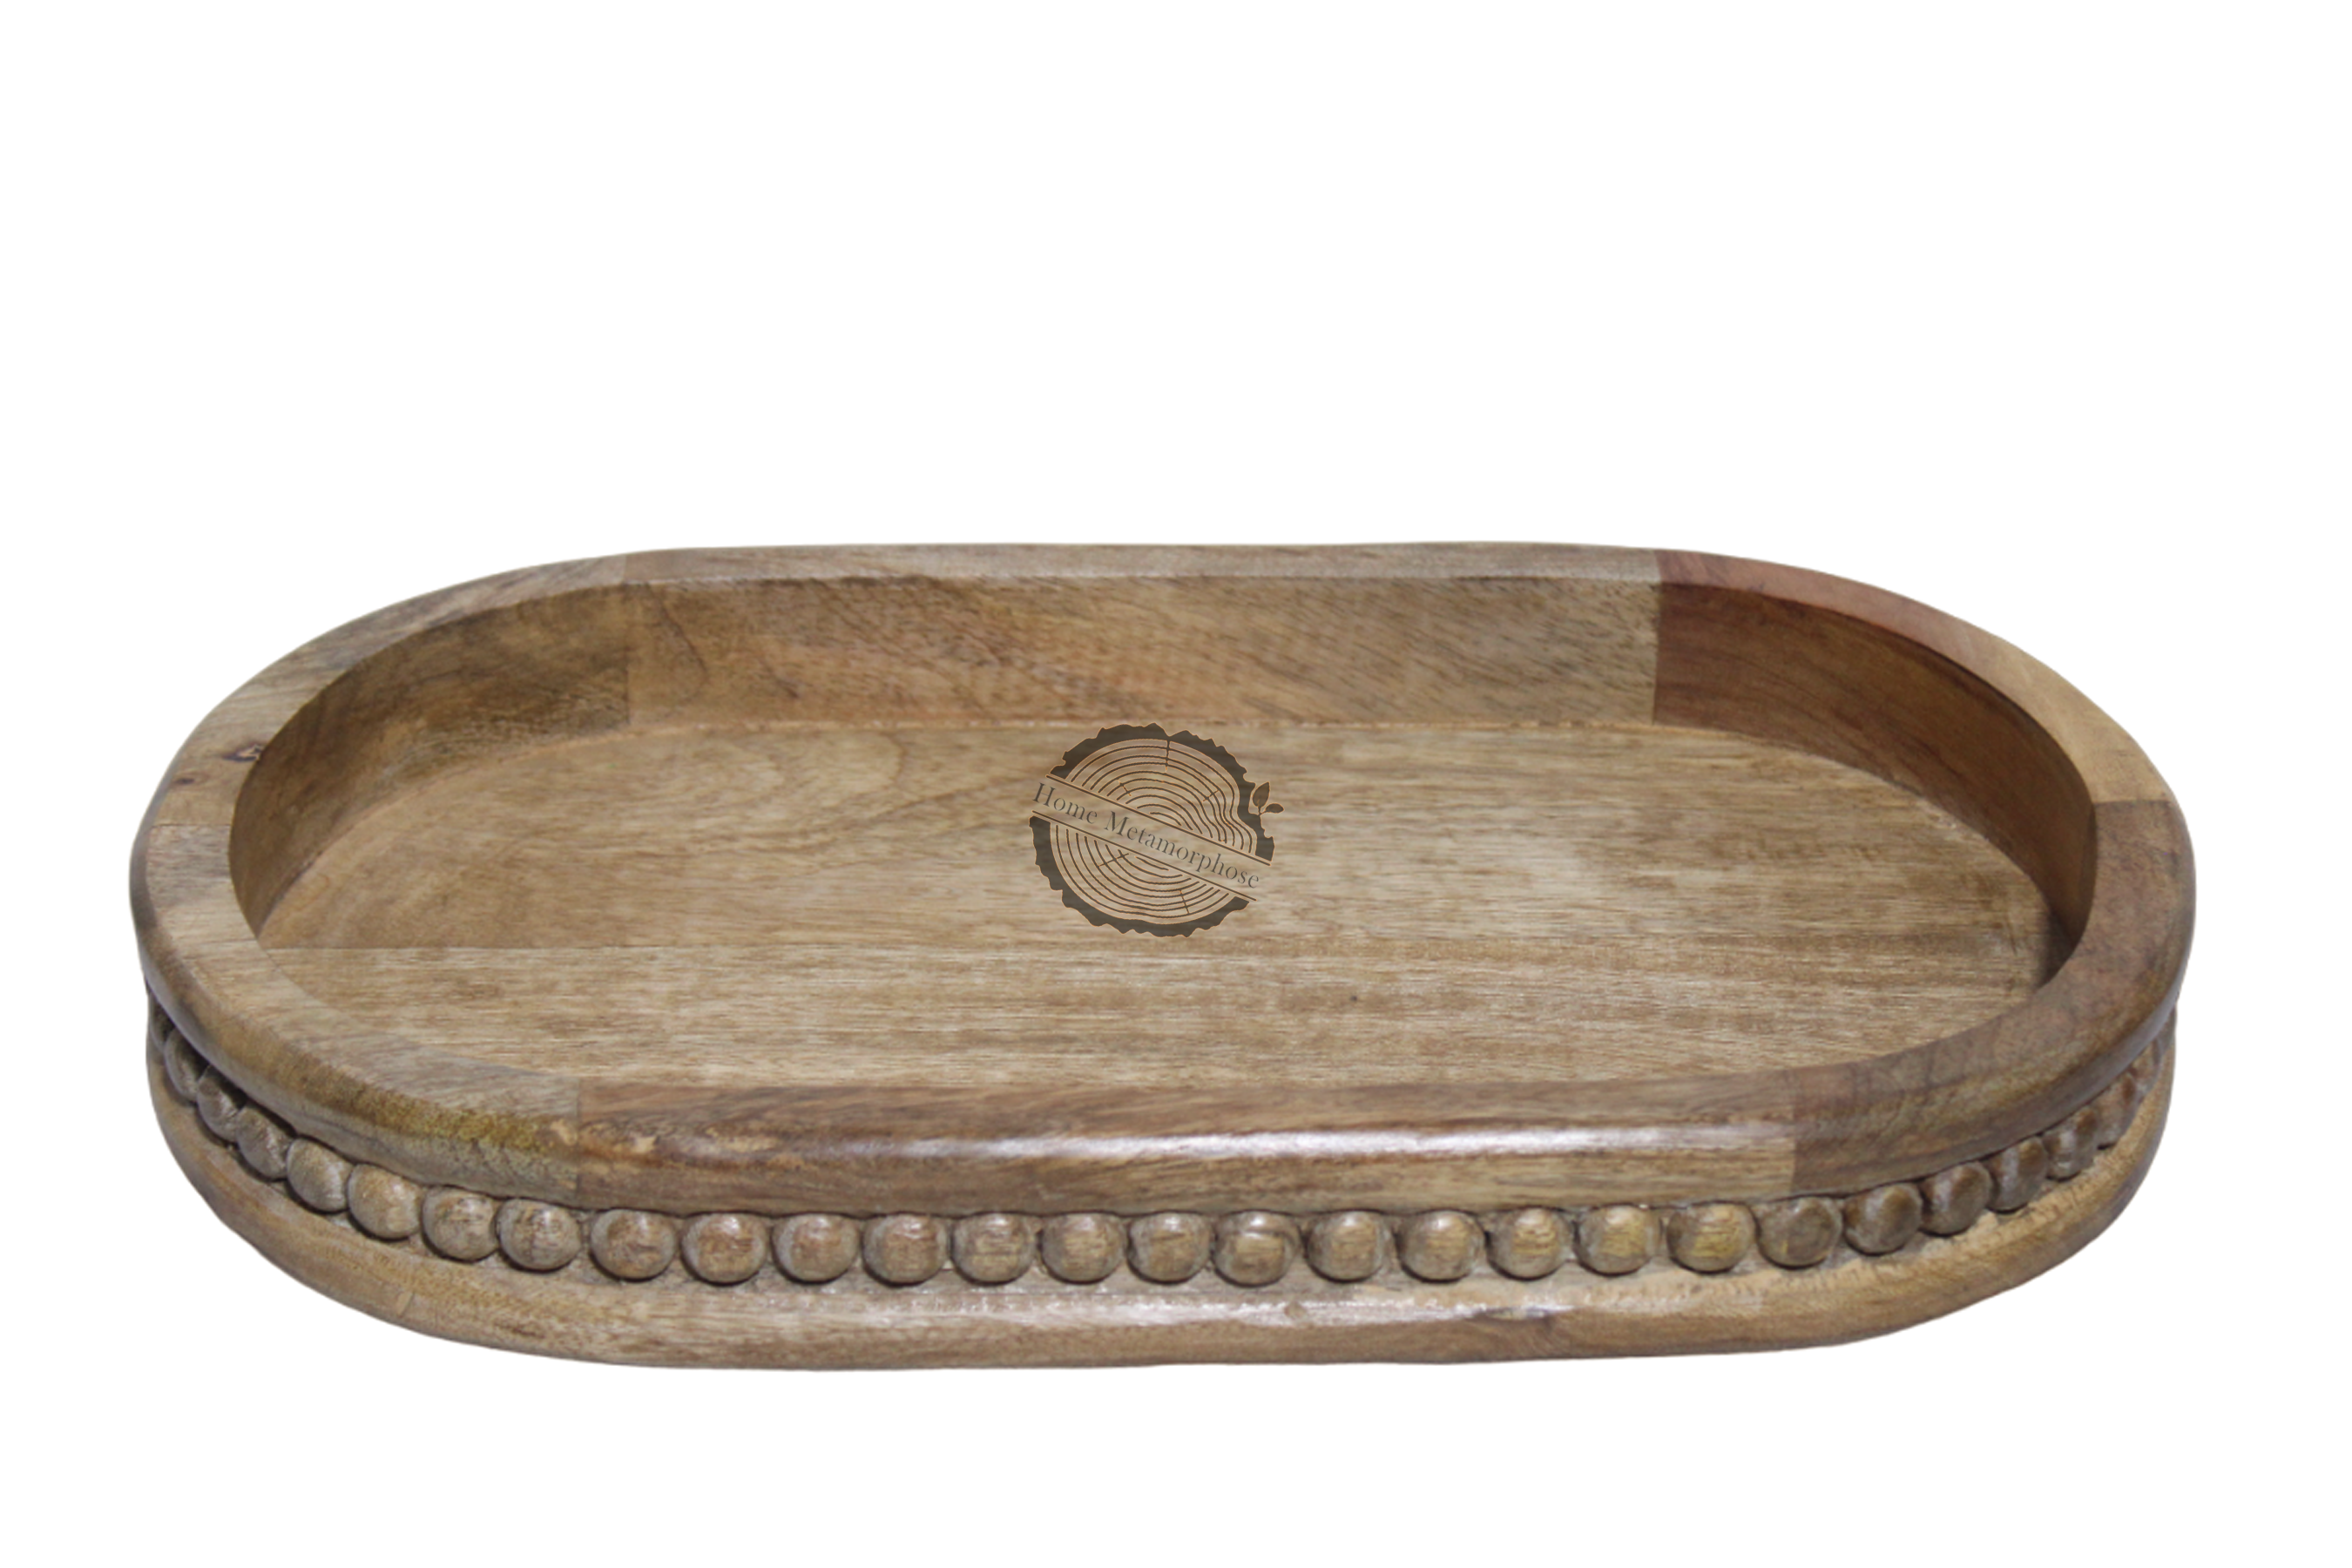 Wooden oval Serving Tray,Couch Tray, Decorative Wooden Serving Tray  Table, Oval Shaped, Oval Wood Serving Tray with Wooden Beads, Outdoor Farmhouse Decorative Tray for Ottoman, Coffee Table, Kitchen Counter Organizer, Home Decor